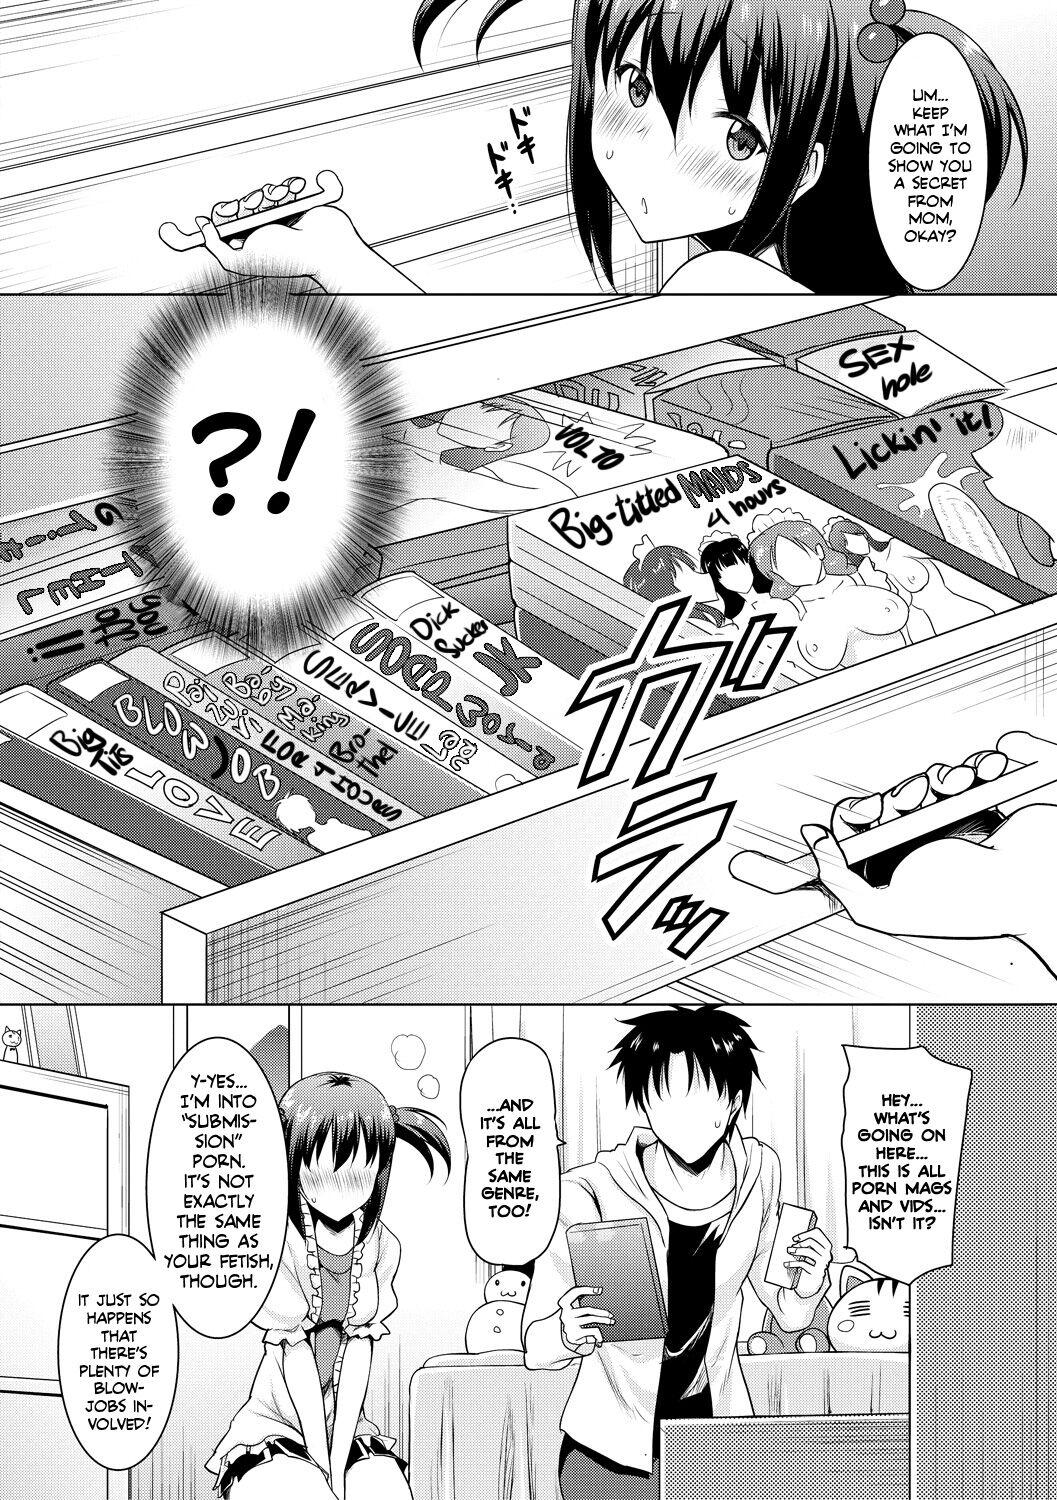 [Pony-R] I Can't Live Without My Little Sister's Tongue Chapter 01-02 + Secret Baby-making Sex with a Big-titted Mother and Daughter! (Kyonyuu Oyako no Shita to Shikyuu ni Renzoku Shasei) [English] [Team Rabu2] [Digital] 10